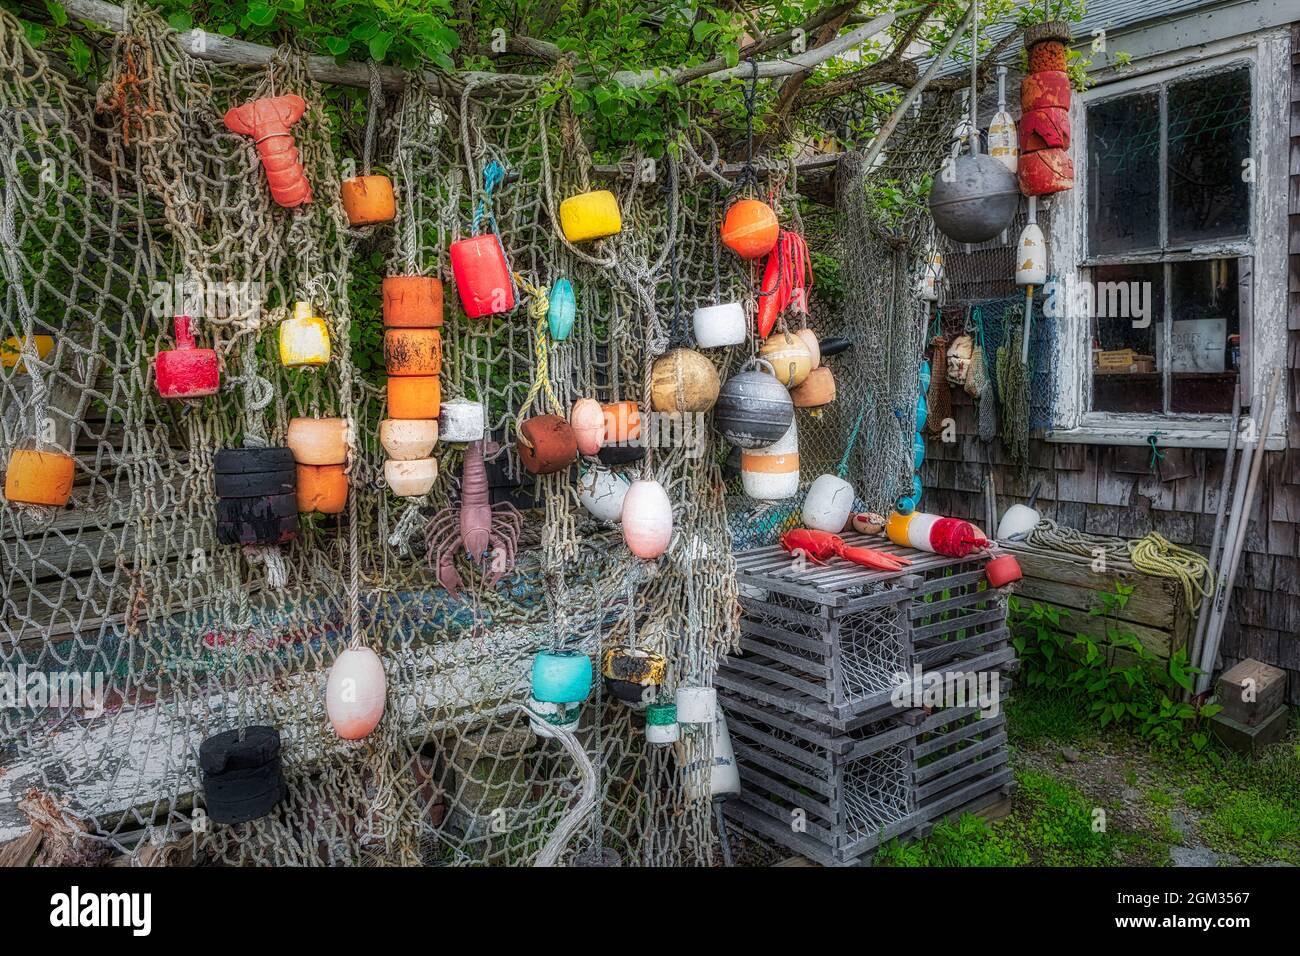 Fishing Net And Buoys Rockport  - Fishing net and buoys adorn the outside of a fishing hut at Bradley Wharf in Rockport, Massachusetts.  This image is Stock Photo